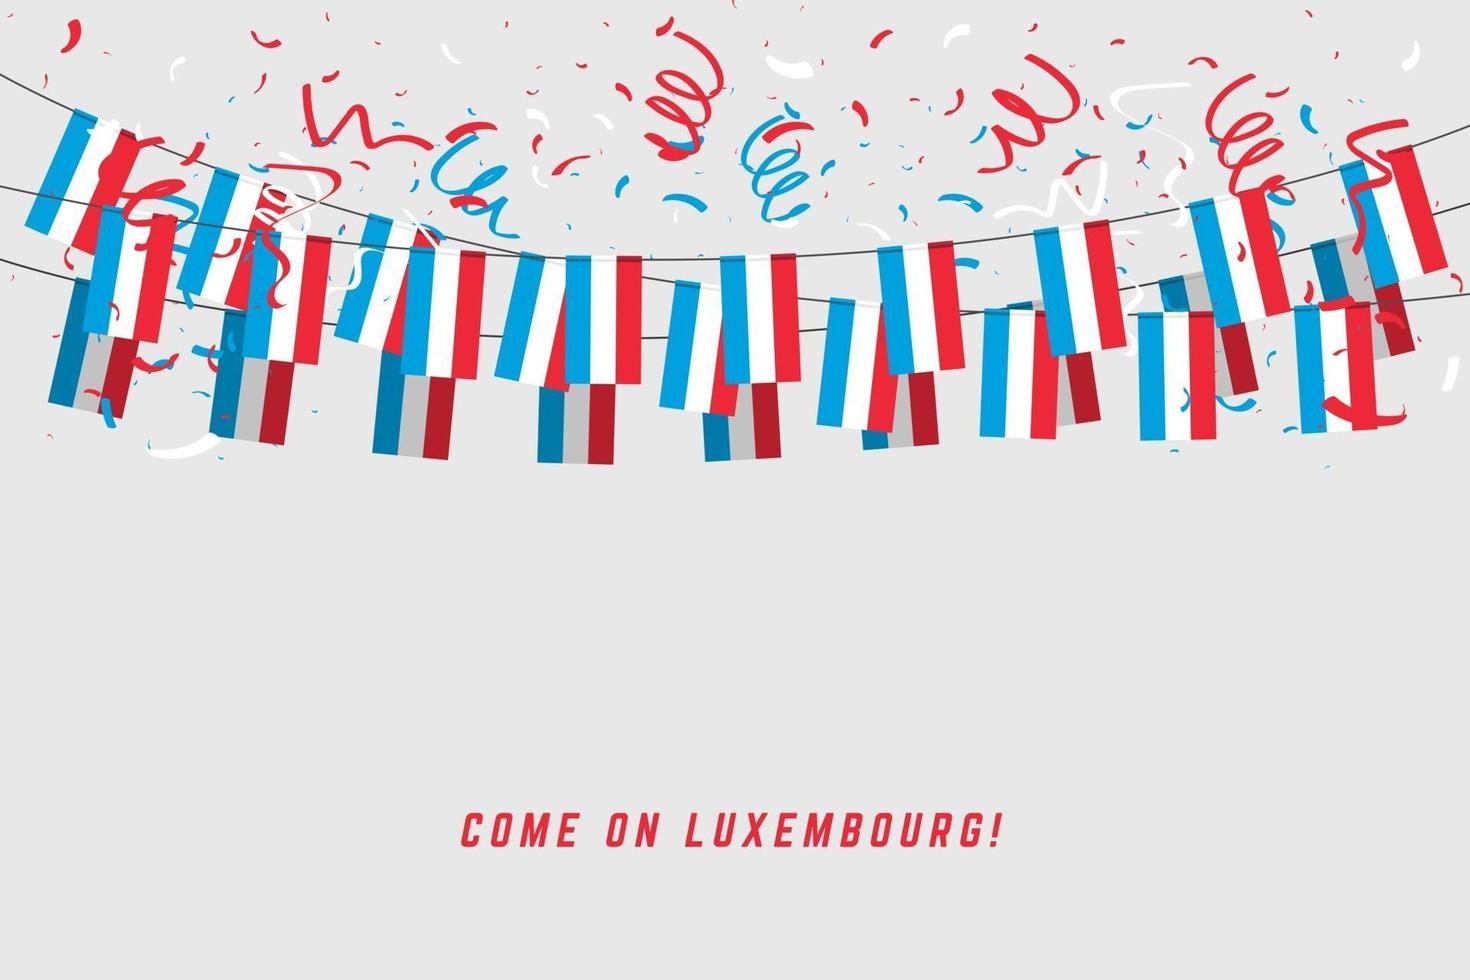 Luxembourg garland flag with confetti on white background, Hang bunting for Luxembourg celebration template banner. vector